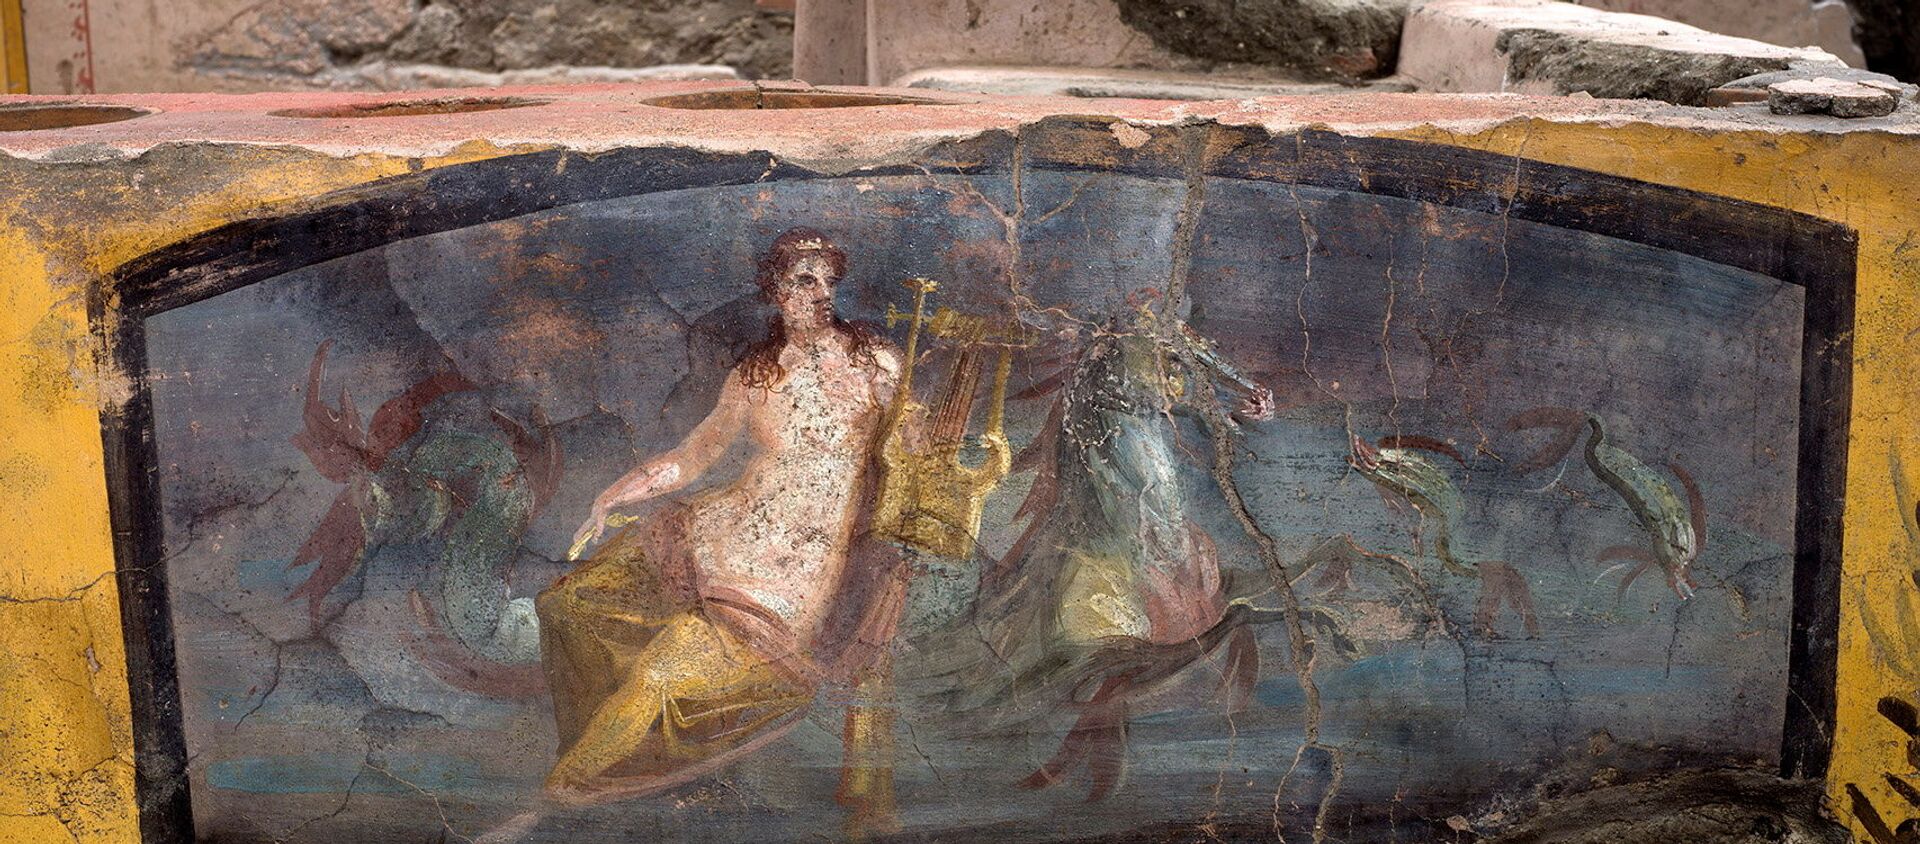 A fresco on an ancient counter depicting a nymph riding a horse uncovered during excavations in Pompeii, Italy, is seen in this handout picture released December 26, 2020 - Sputnik International, 1920, 27.12.2020